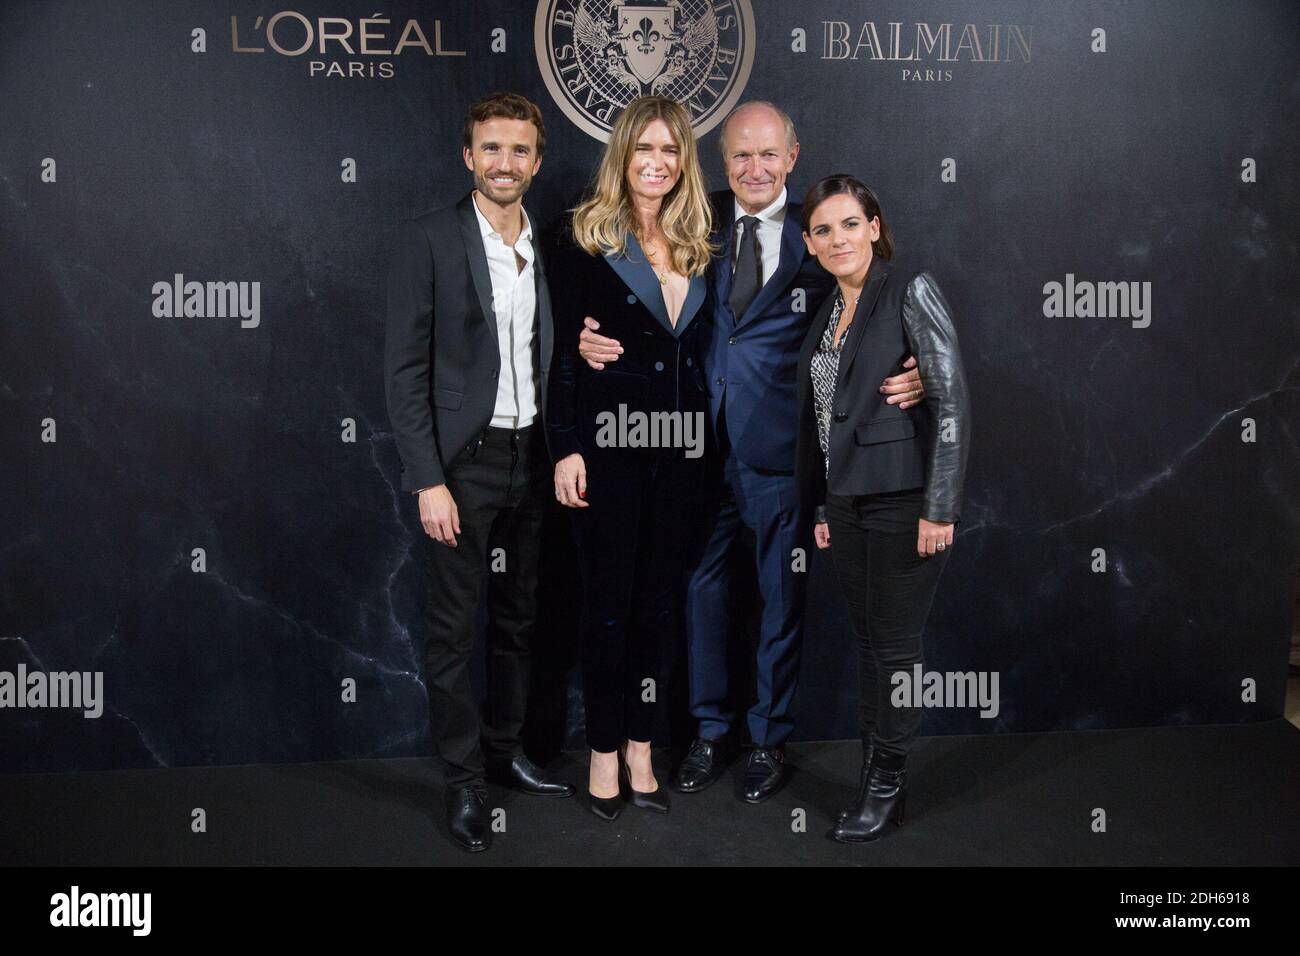 Pierre-Emmanuel Angeloglou, Jean-Paul Agon PDG L'Oreal and familly attends  the L'Oreal Paris X Balmain event as part of the Paris Fashion Week  Womenswear Spring/Summer 2018 in Paris, France, September 28 2017. Photo